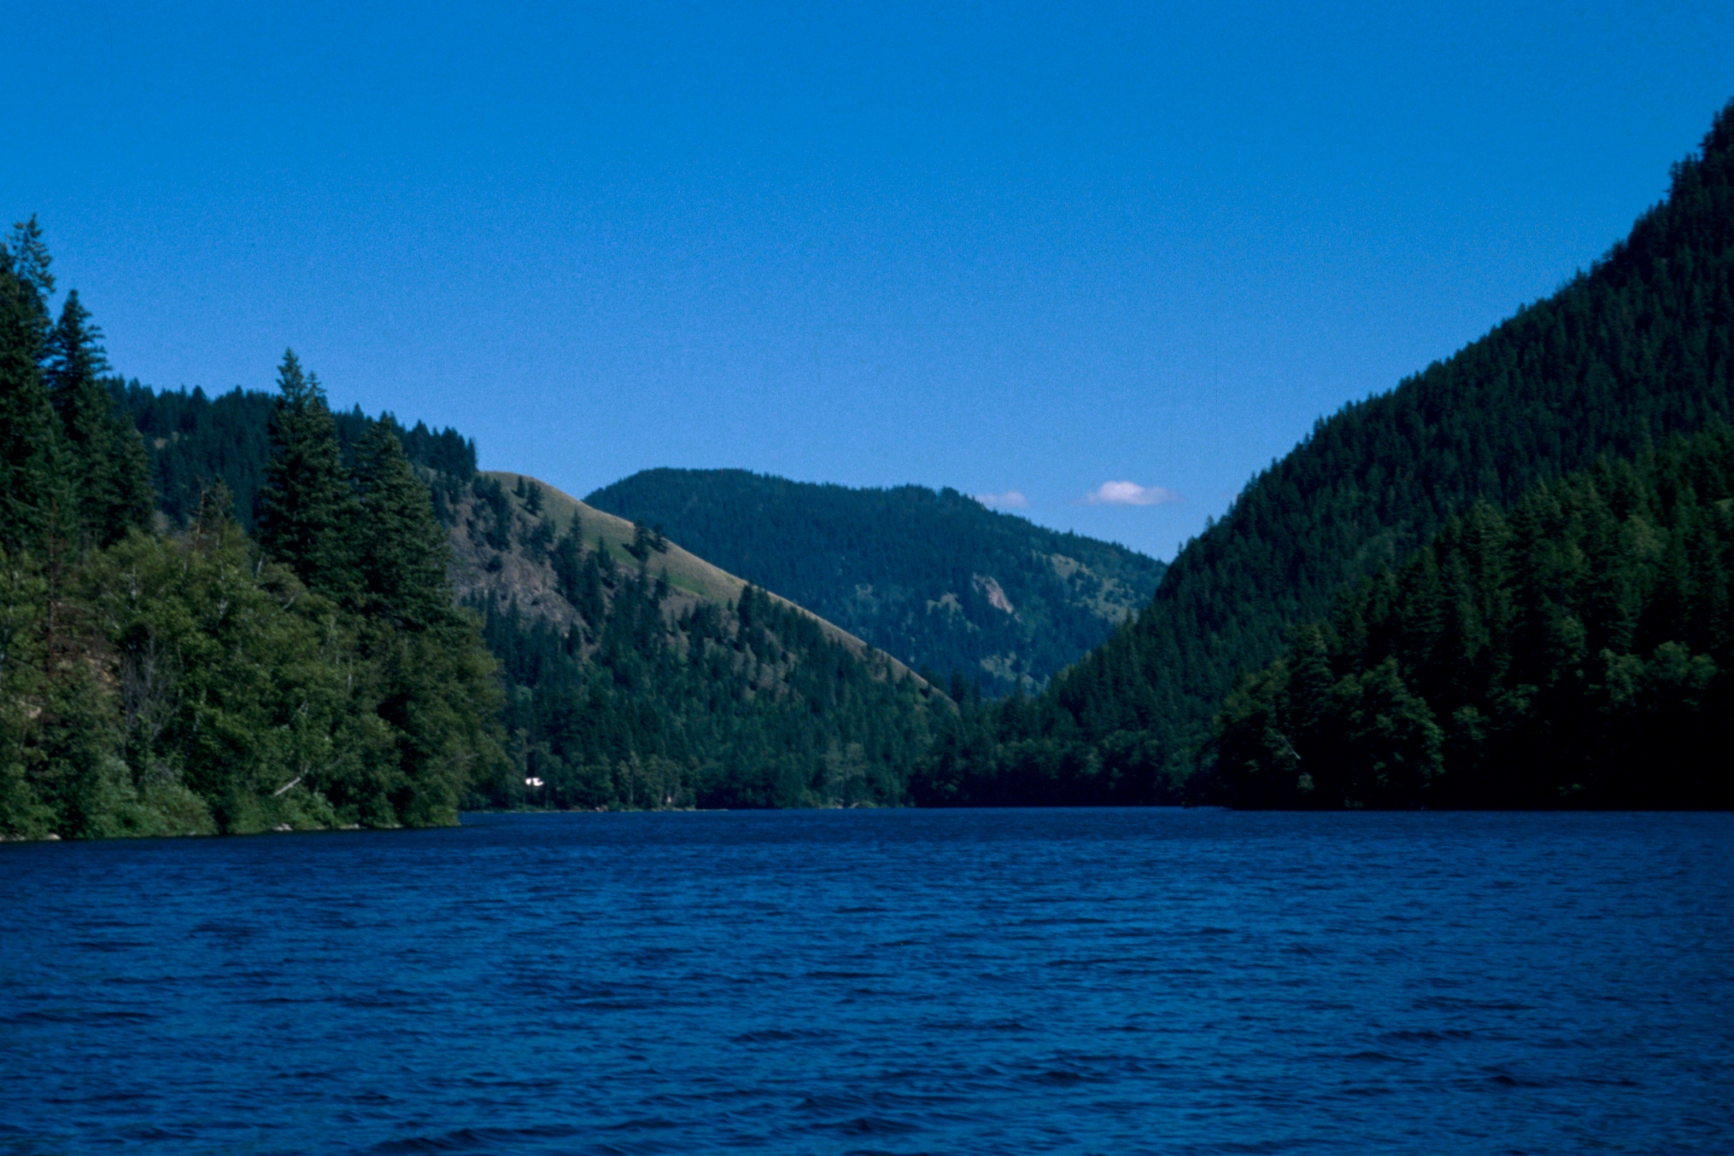 View of the mountains past Echo Lake as dusk approaches.